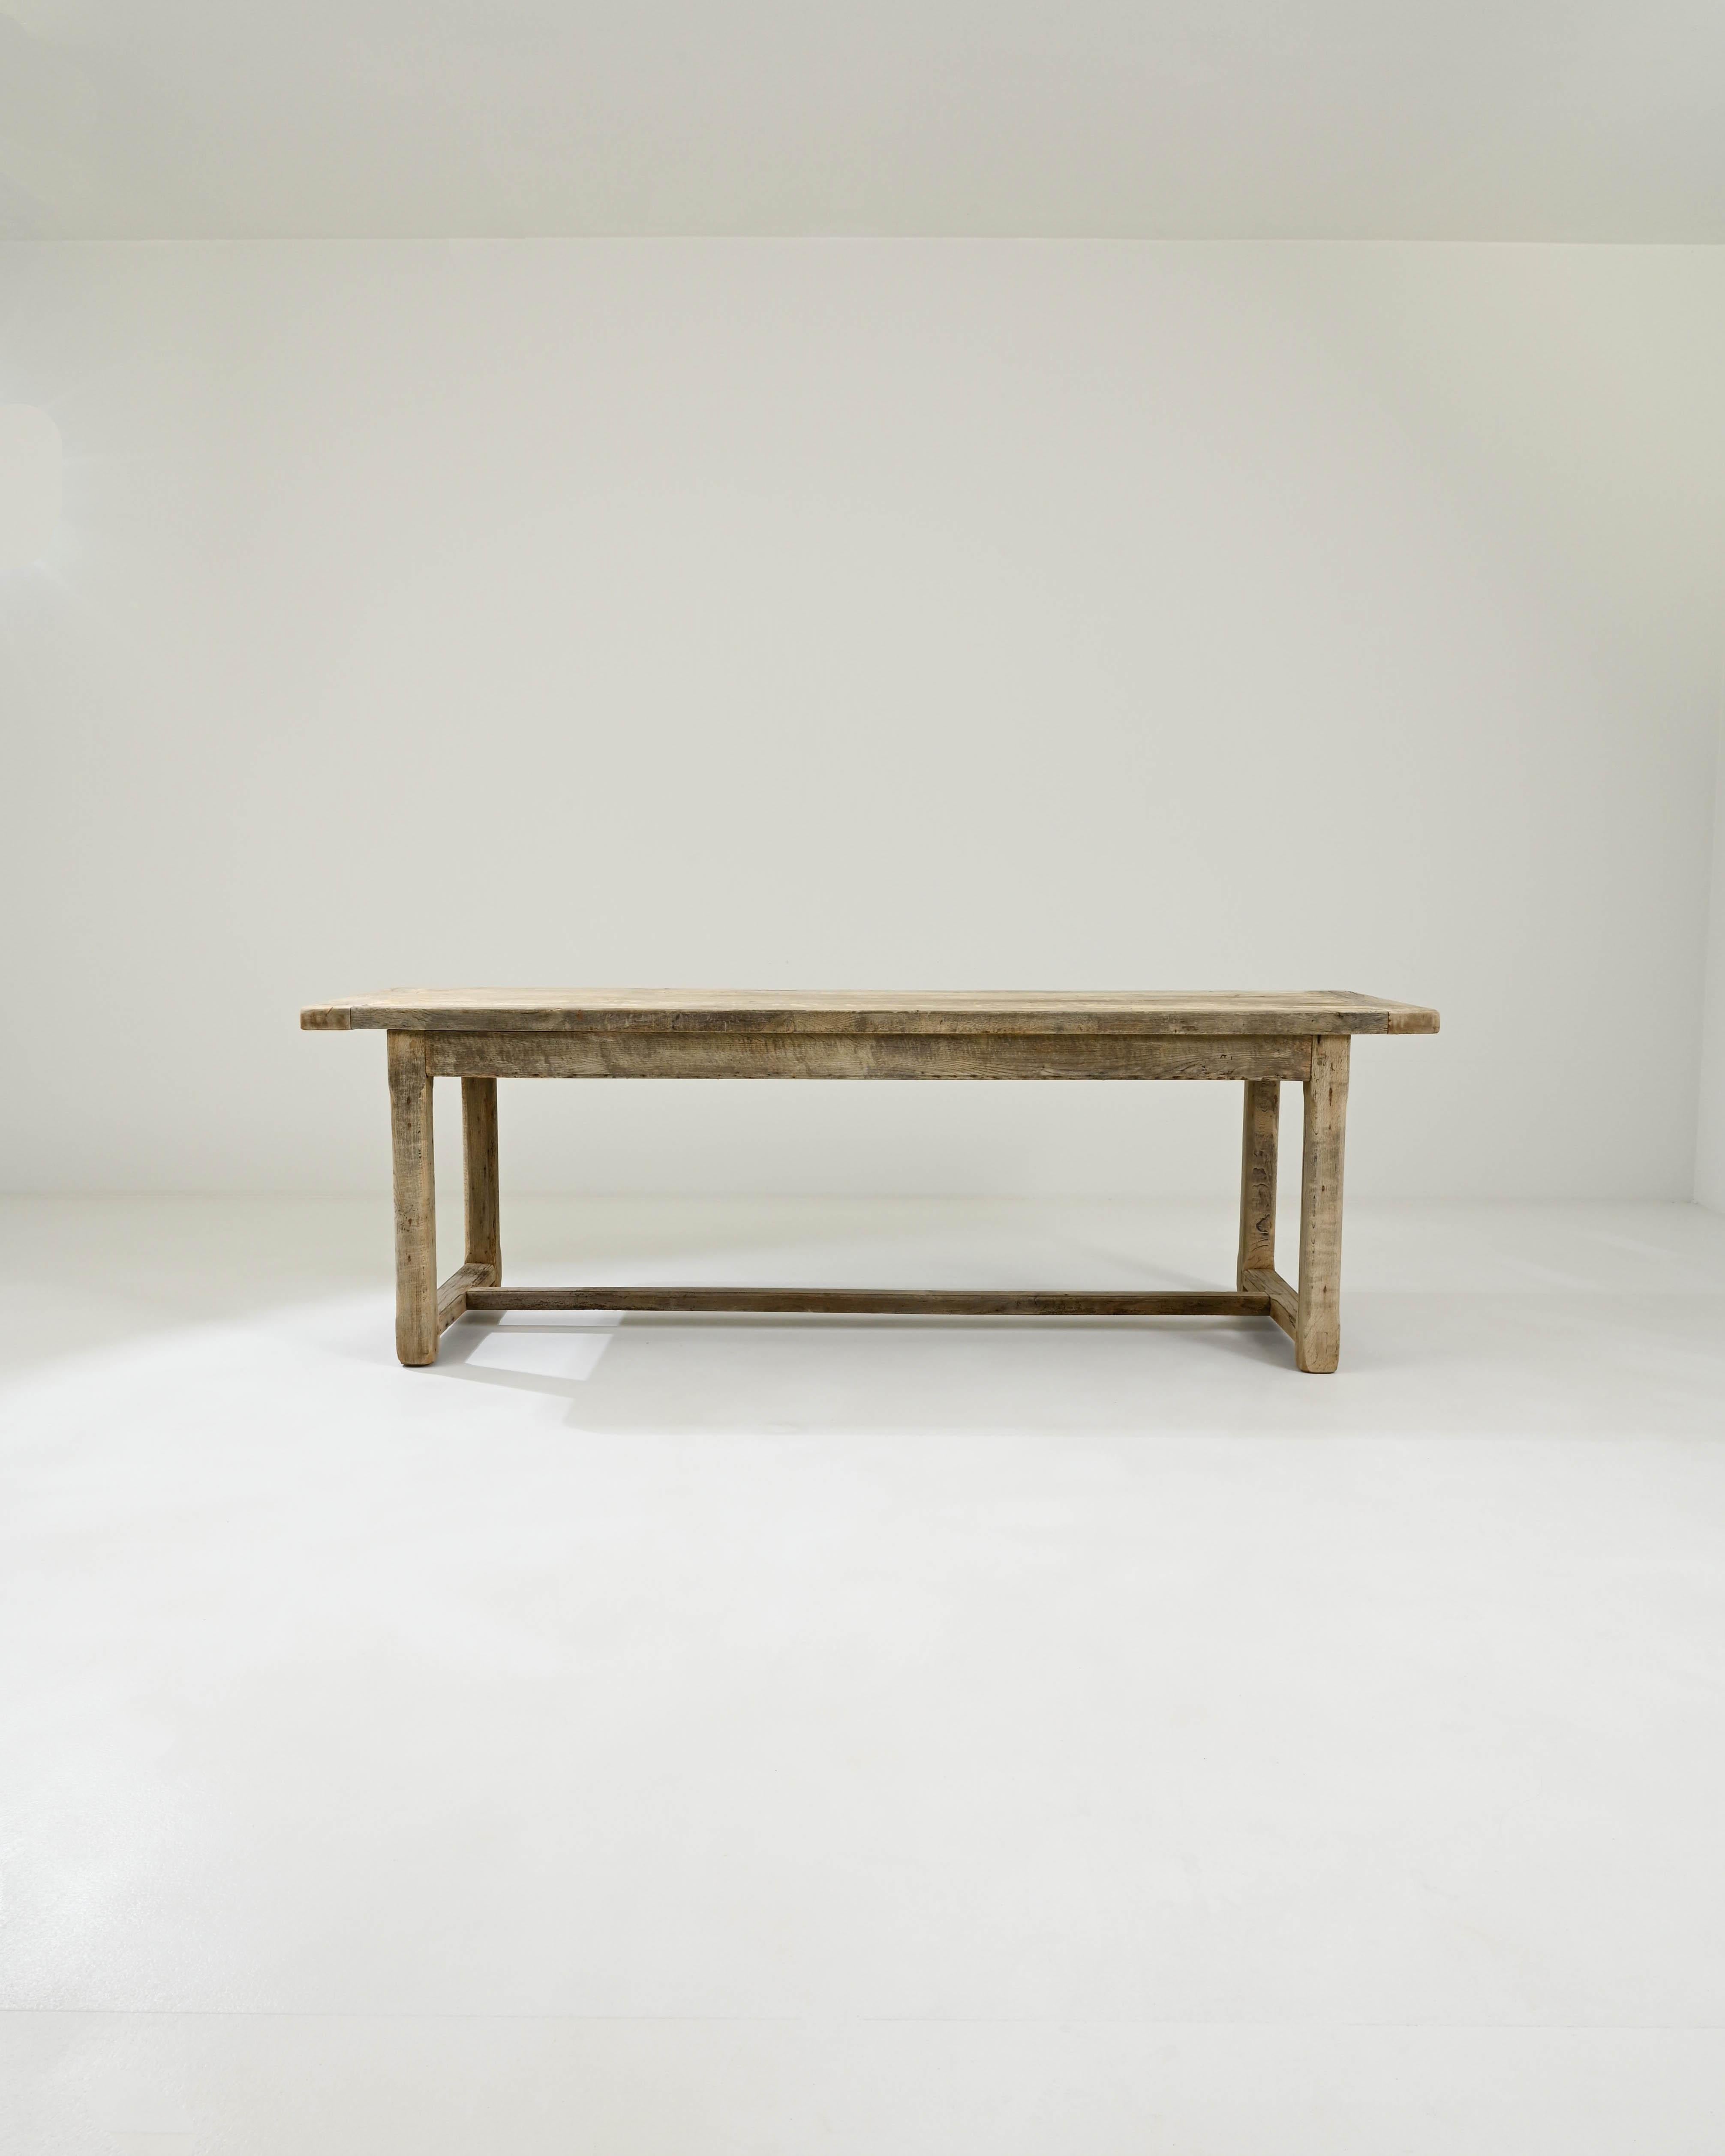 Comfortably accommodating your next dinner party, this table was crafted circa 1900 in France from high-quality European oak. It boasts a long tabletop supported by legs connected to each other by stretchers, forming square structures that add